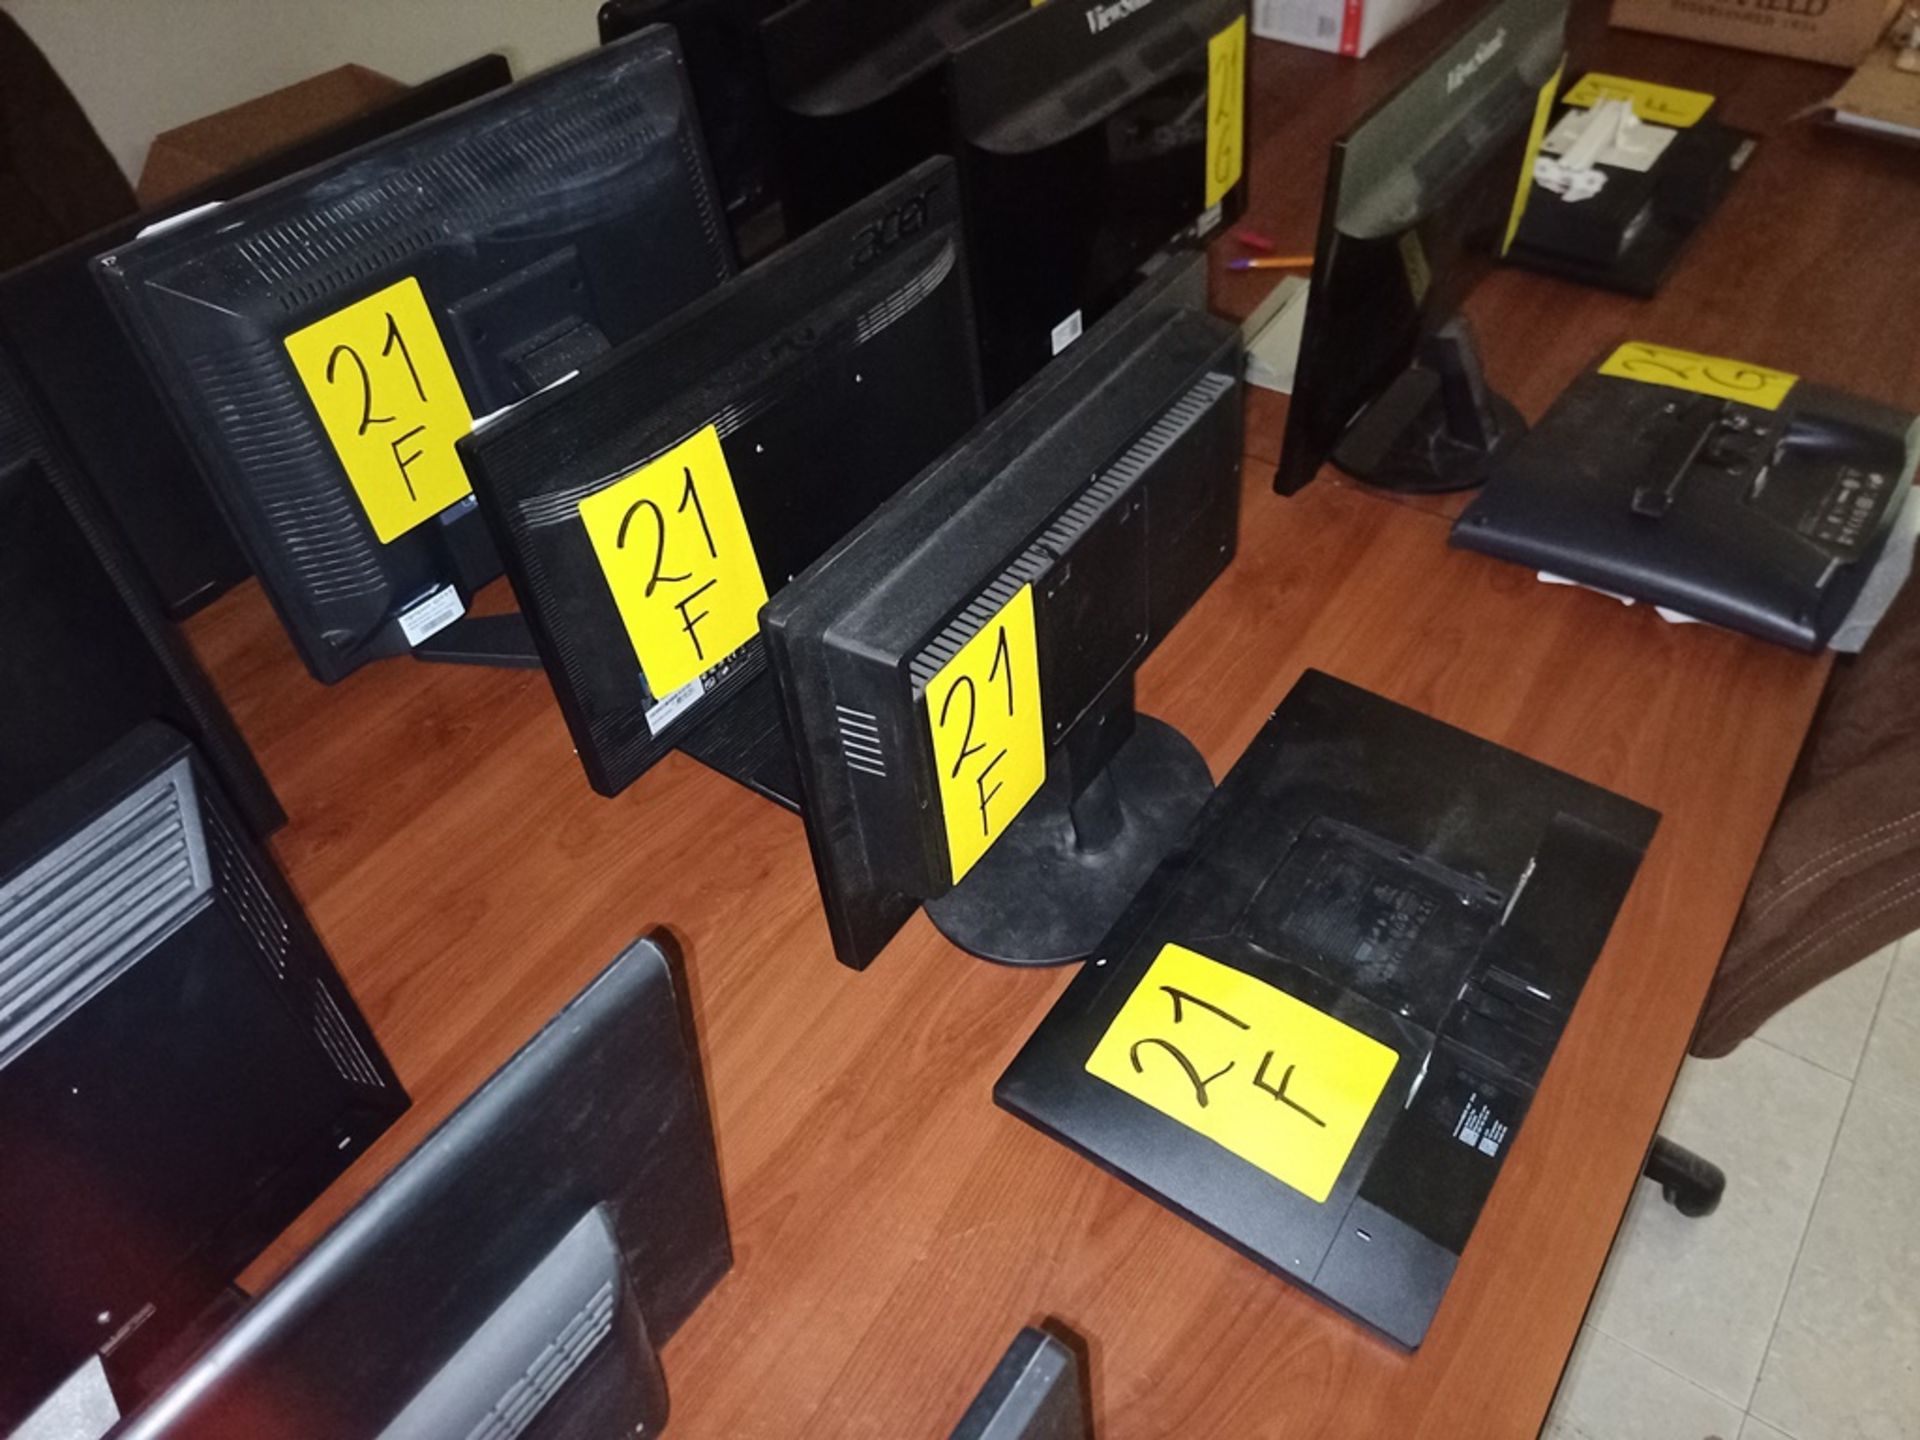 Lot of 6 Monitors contains: 6 Monitors of 17" brands Samsung, Acer, ADC, Dell. Please inspect. - Image 4 of 8